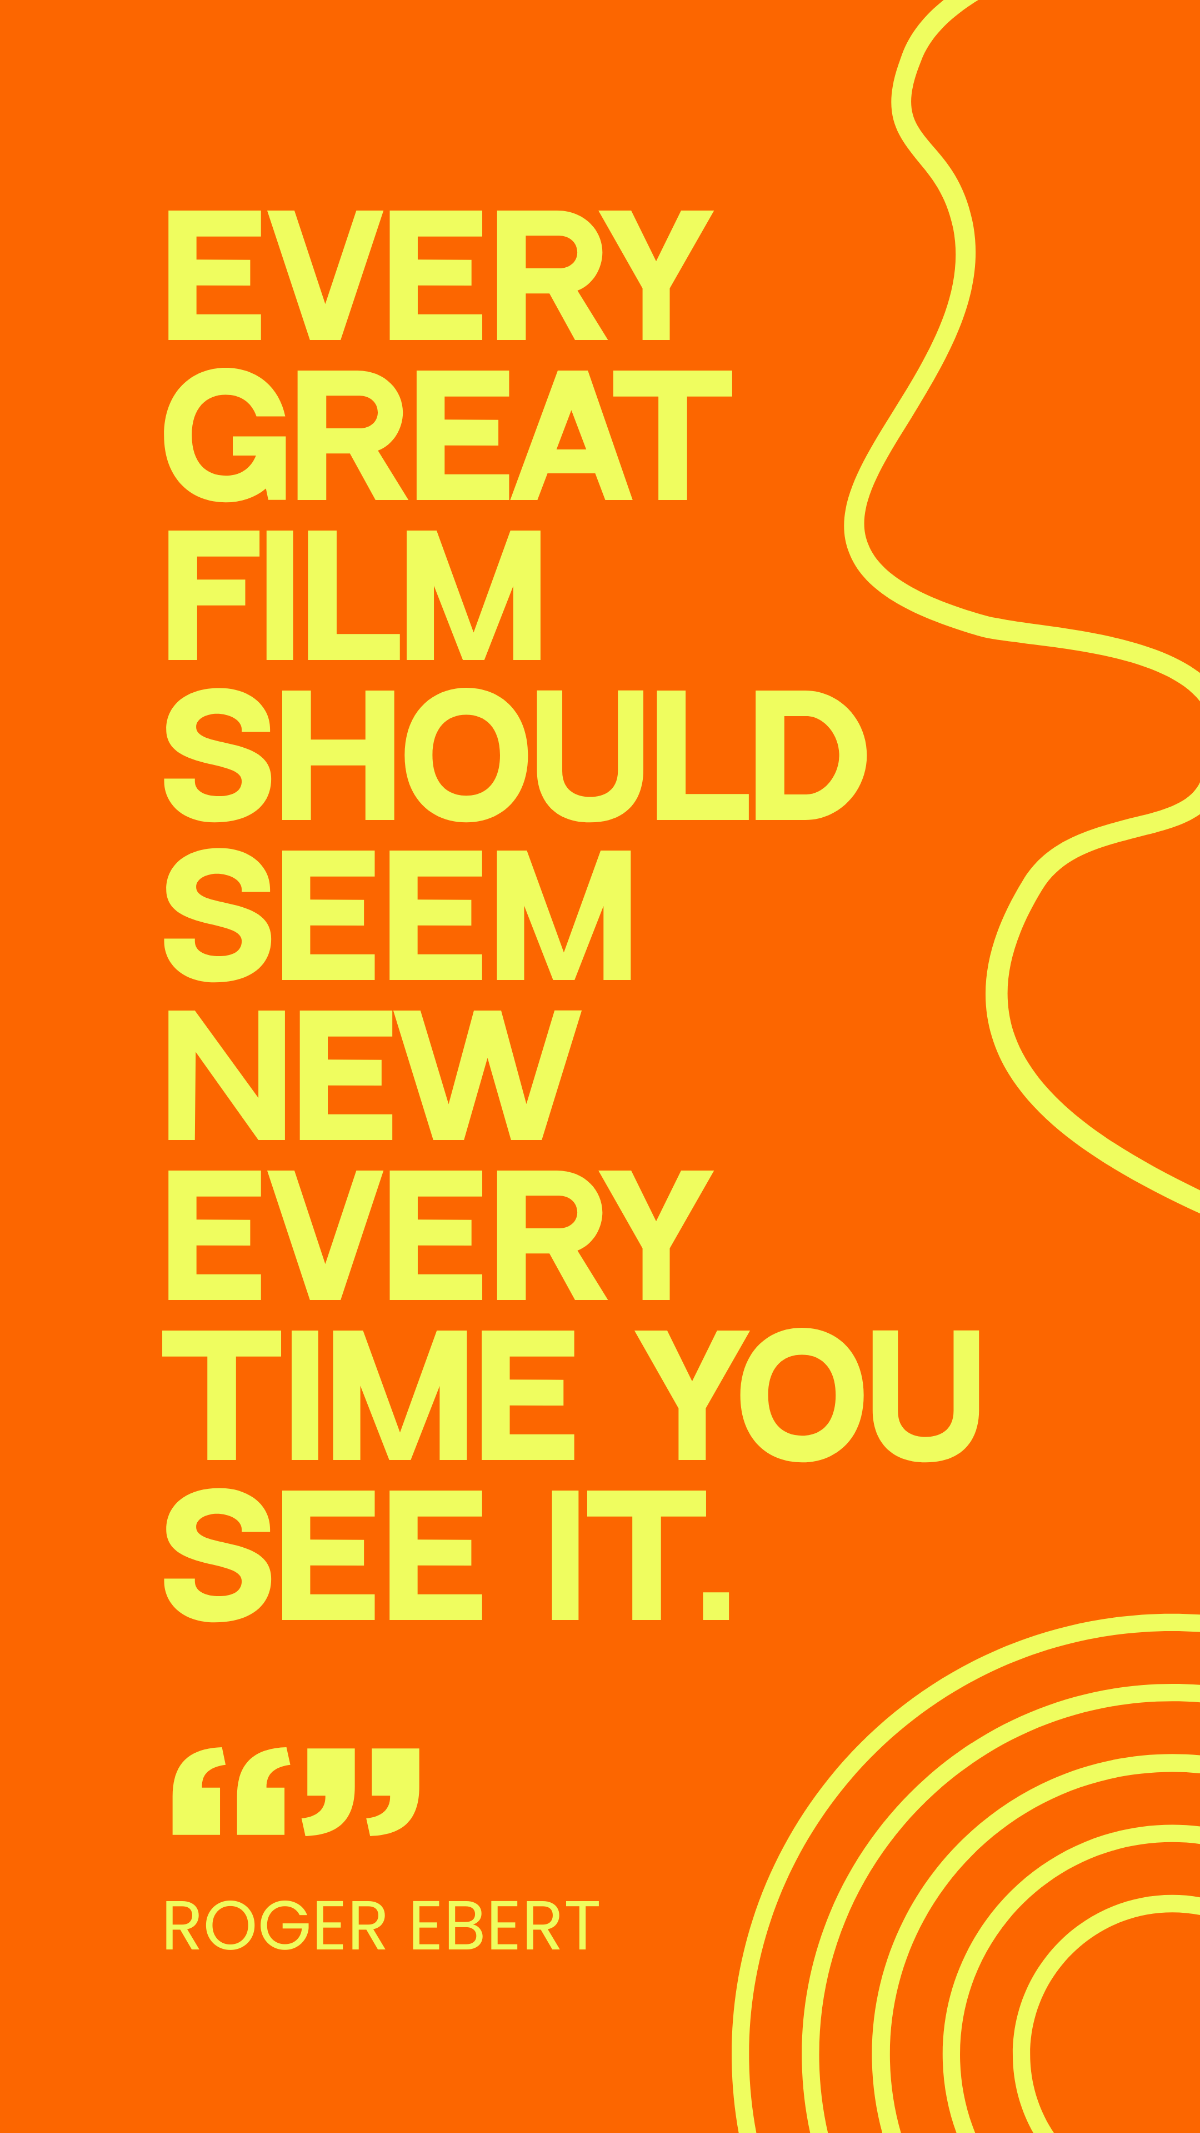 Free Roger Ebert - Every great film should seem new every time you see it. Template